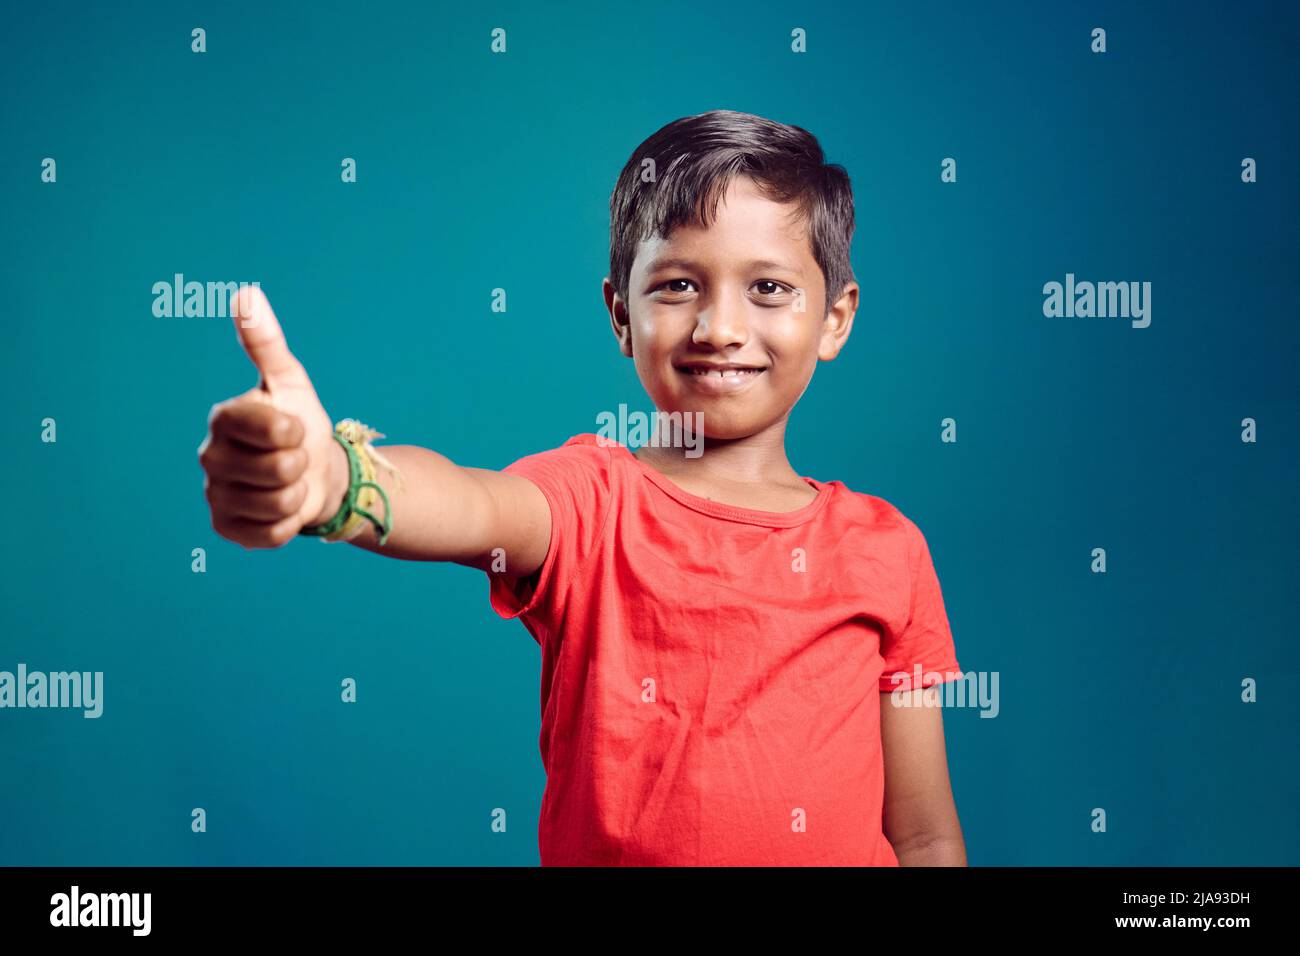 Preteen boy showing thumbs up. Asian boy 8-10 years old. Stock Photo